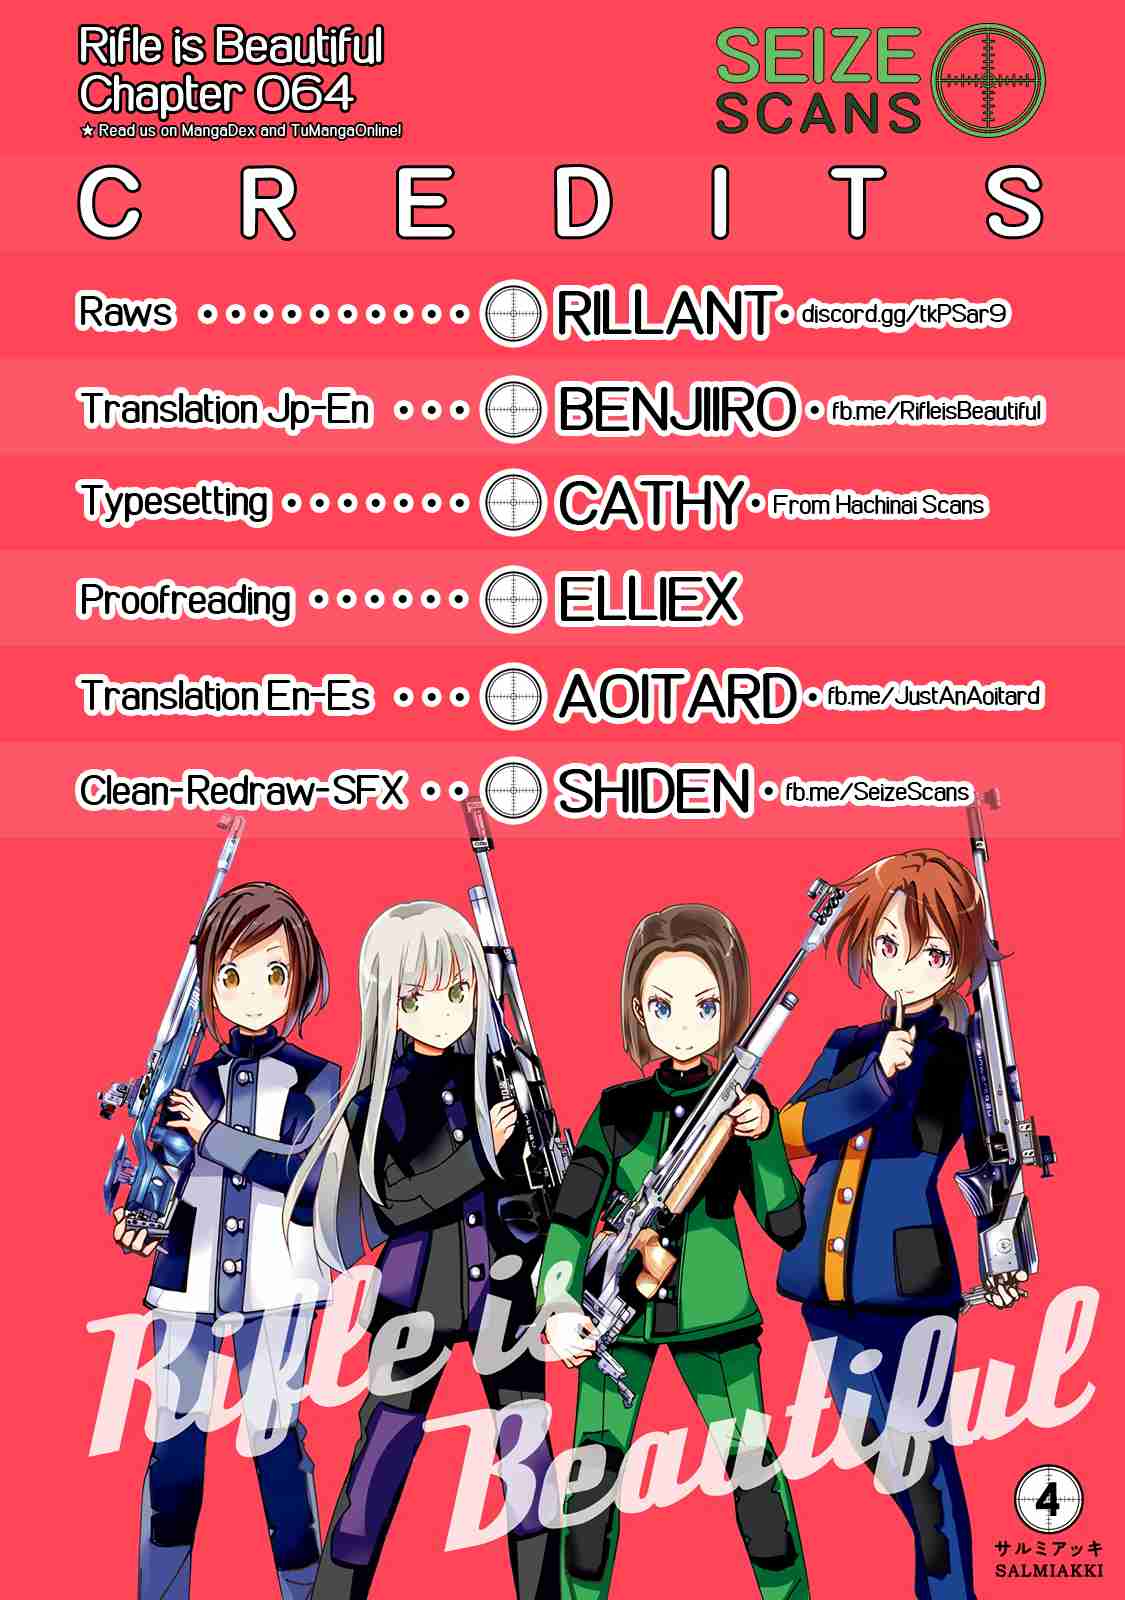 Rifle Is Beautiful Vol. 4 Ch. 64 I'll be shooting